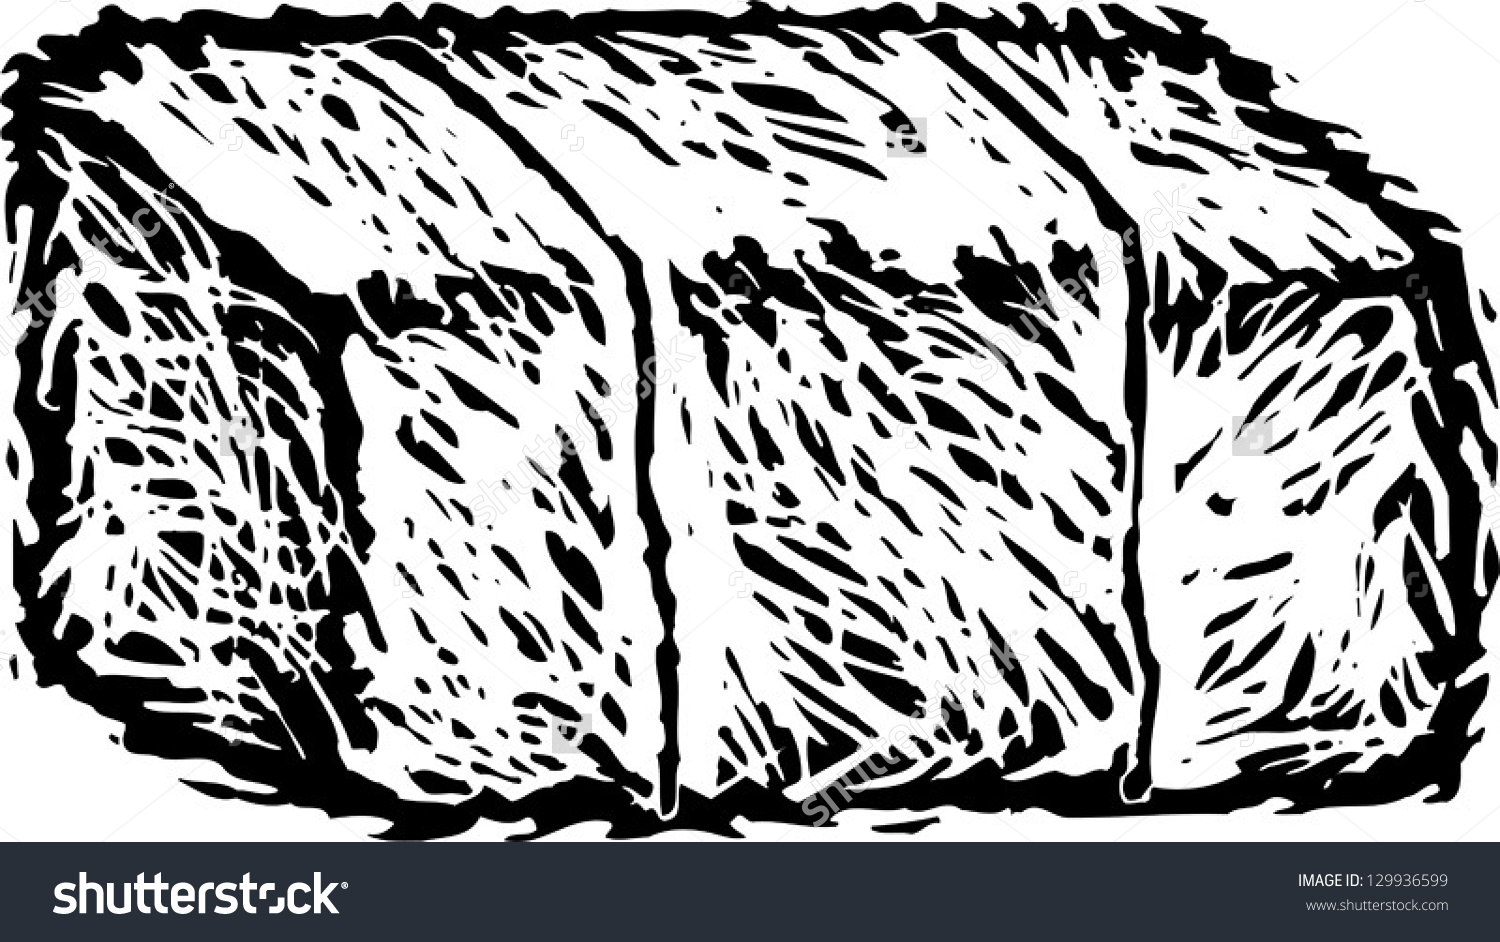 Free Hay Clipart Black And White, Download Free Hay Clipart Black And ...